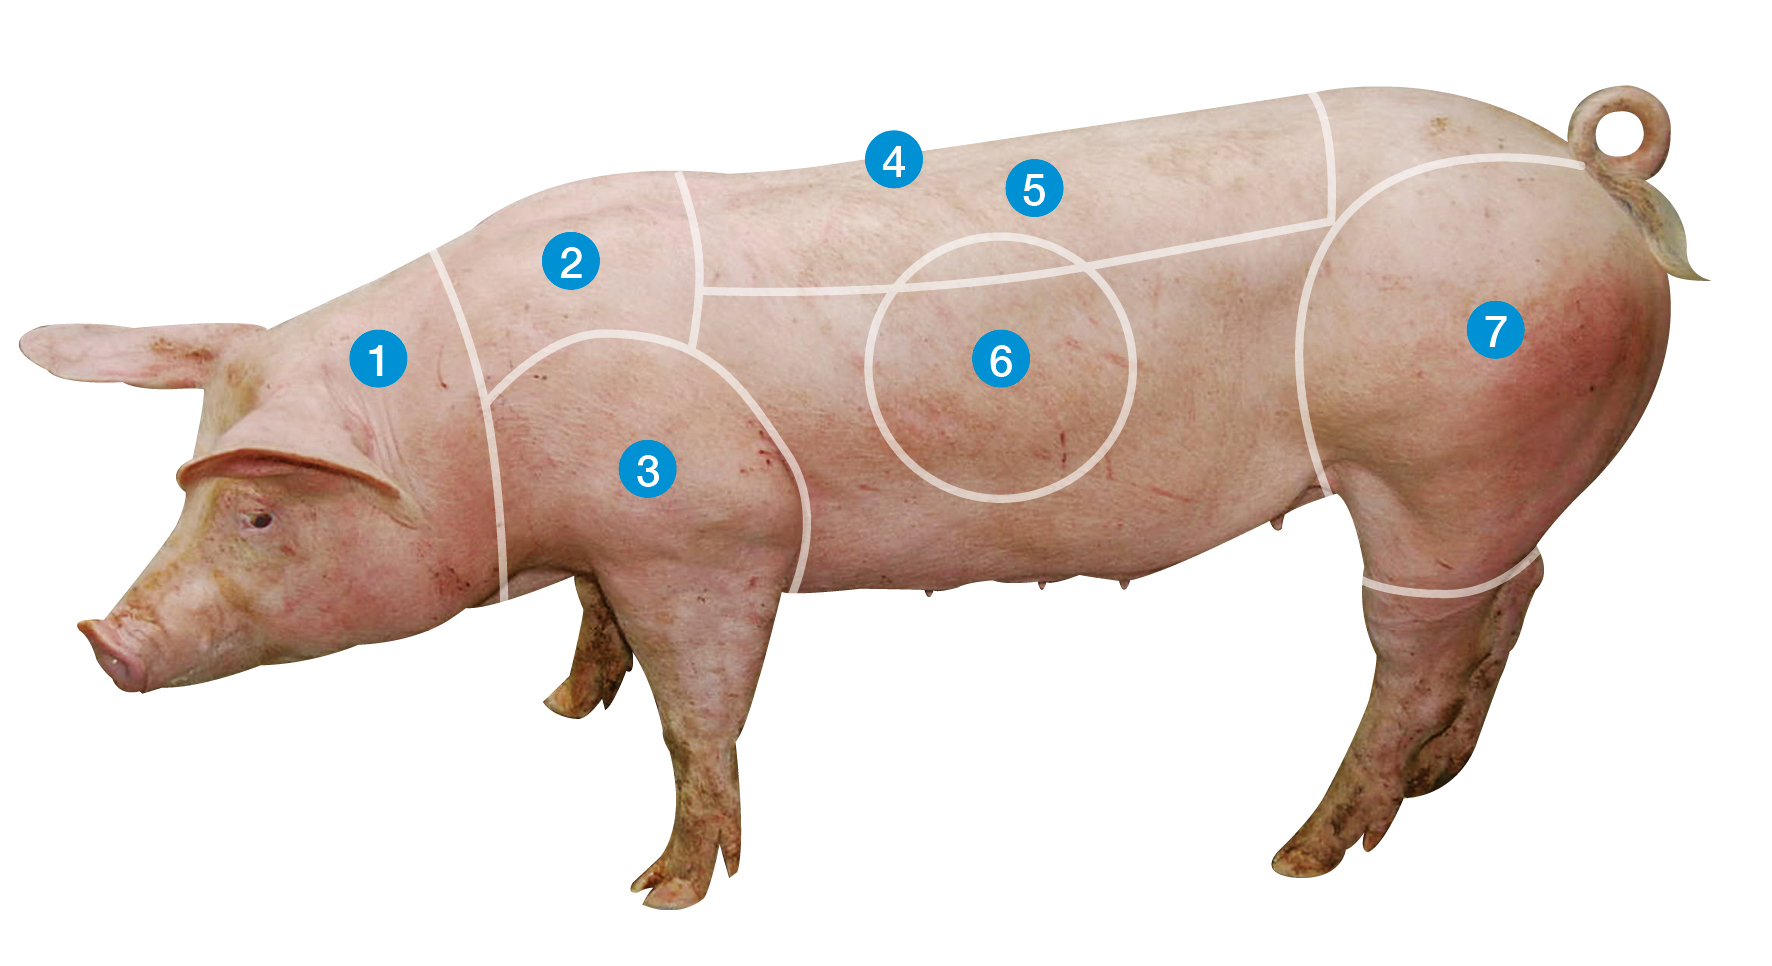 A finished pig with markings from 1–7 to show the areas to look for when judging. 1 - Head, 2 - Neck, 3 - Shoulder, 4 - Topline, 5 - Loin, 6 - Spring of rib, 7 - Ham/leg. 